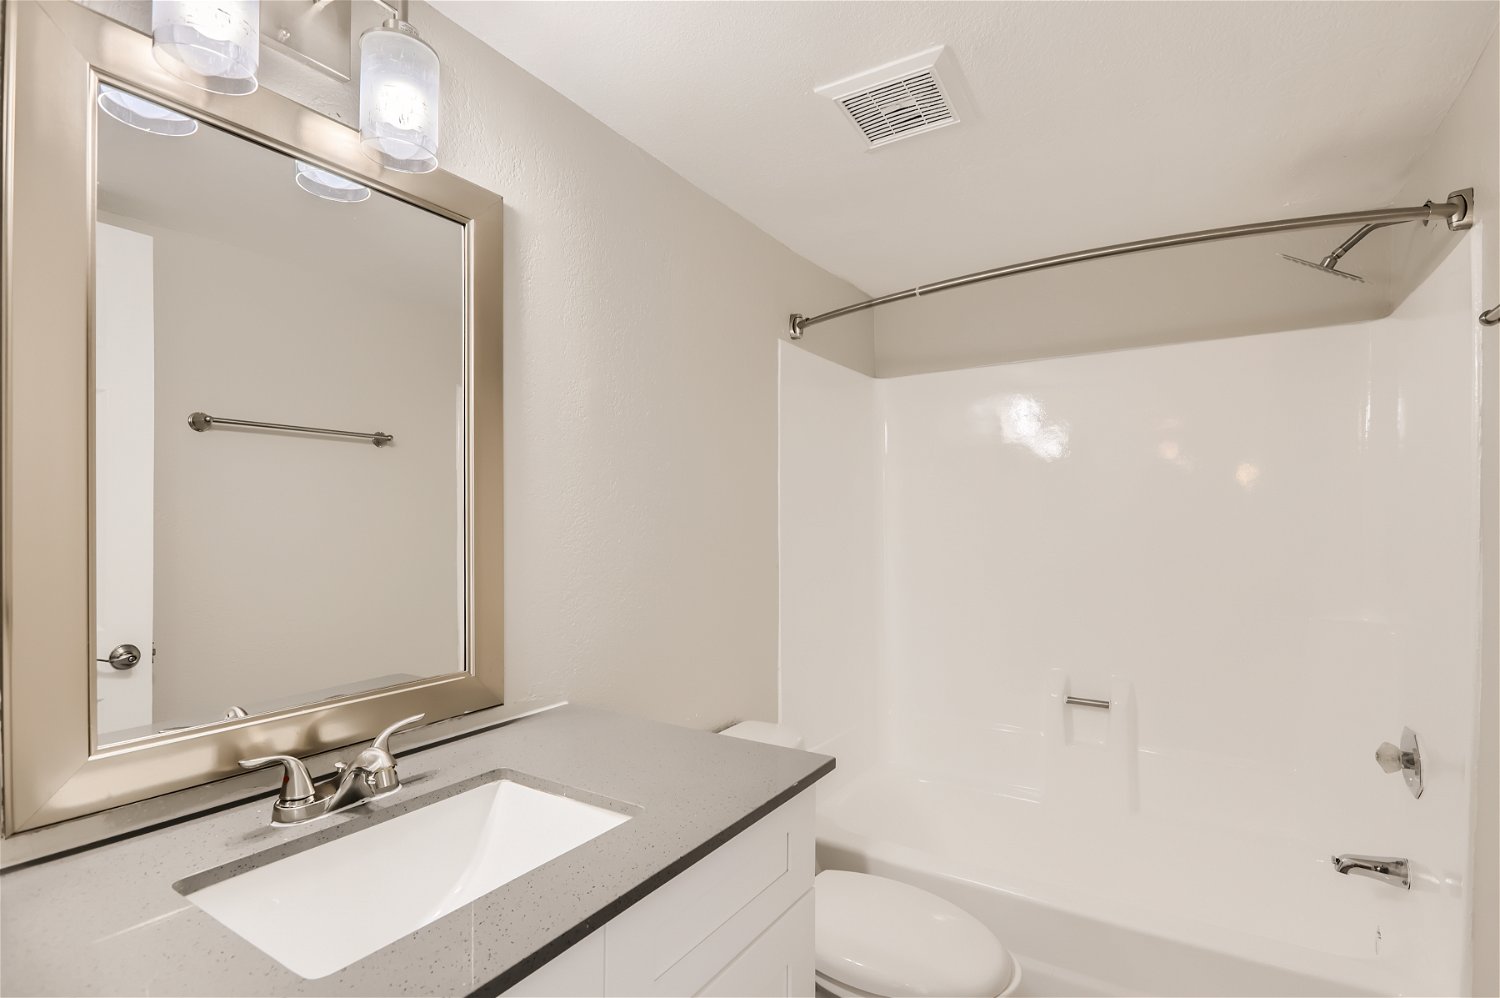 The remodeled bathroom with a tub, quartz vanity, and mirror at Rise Trailside.